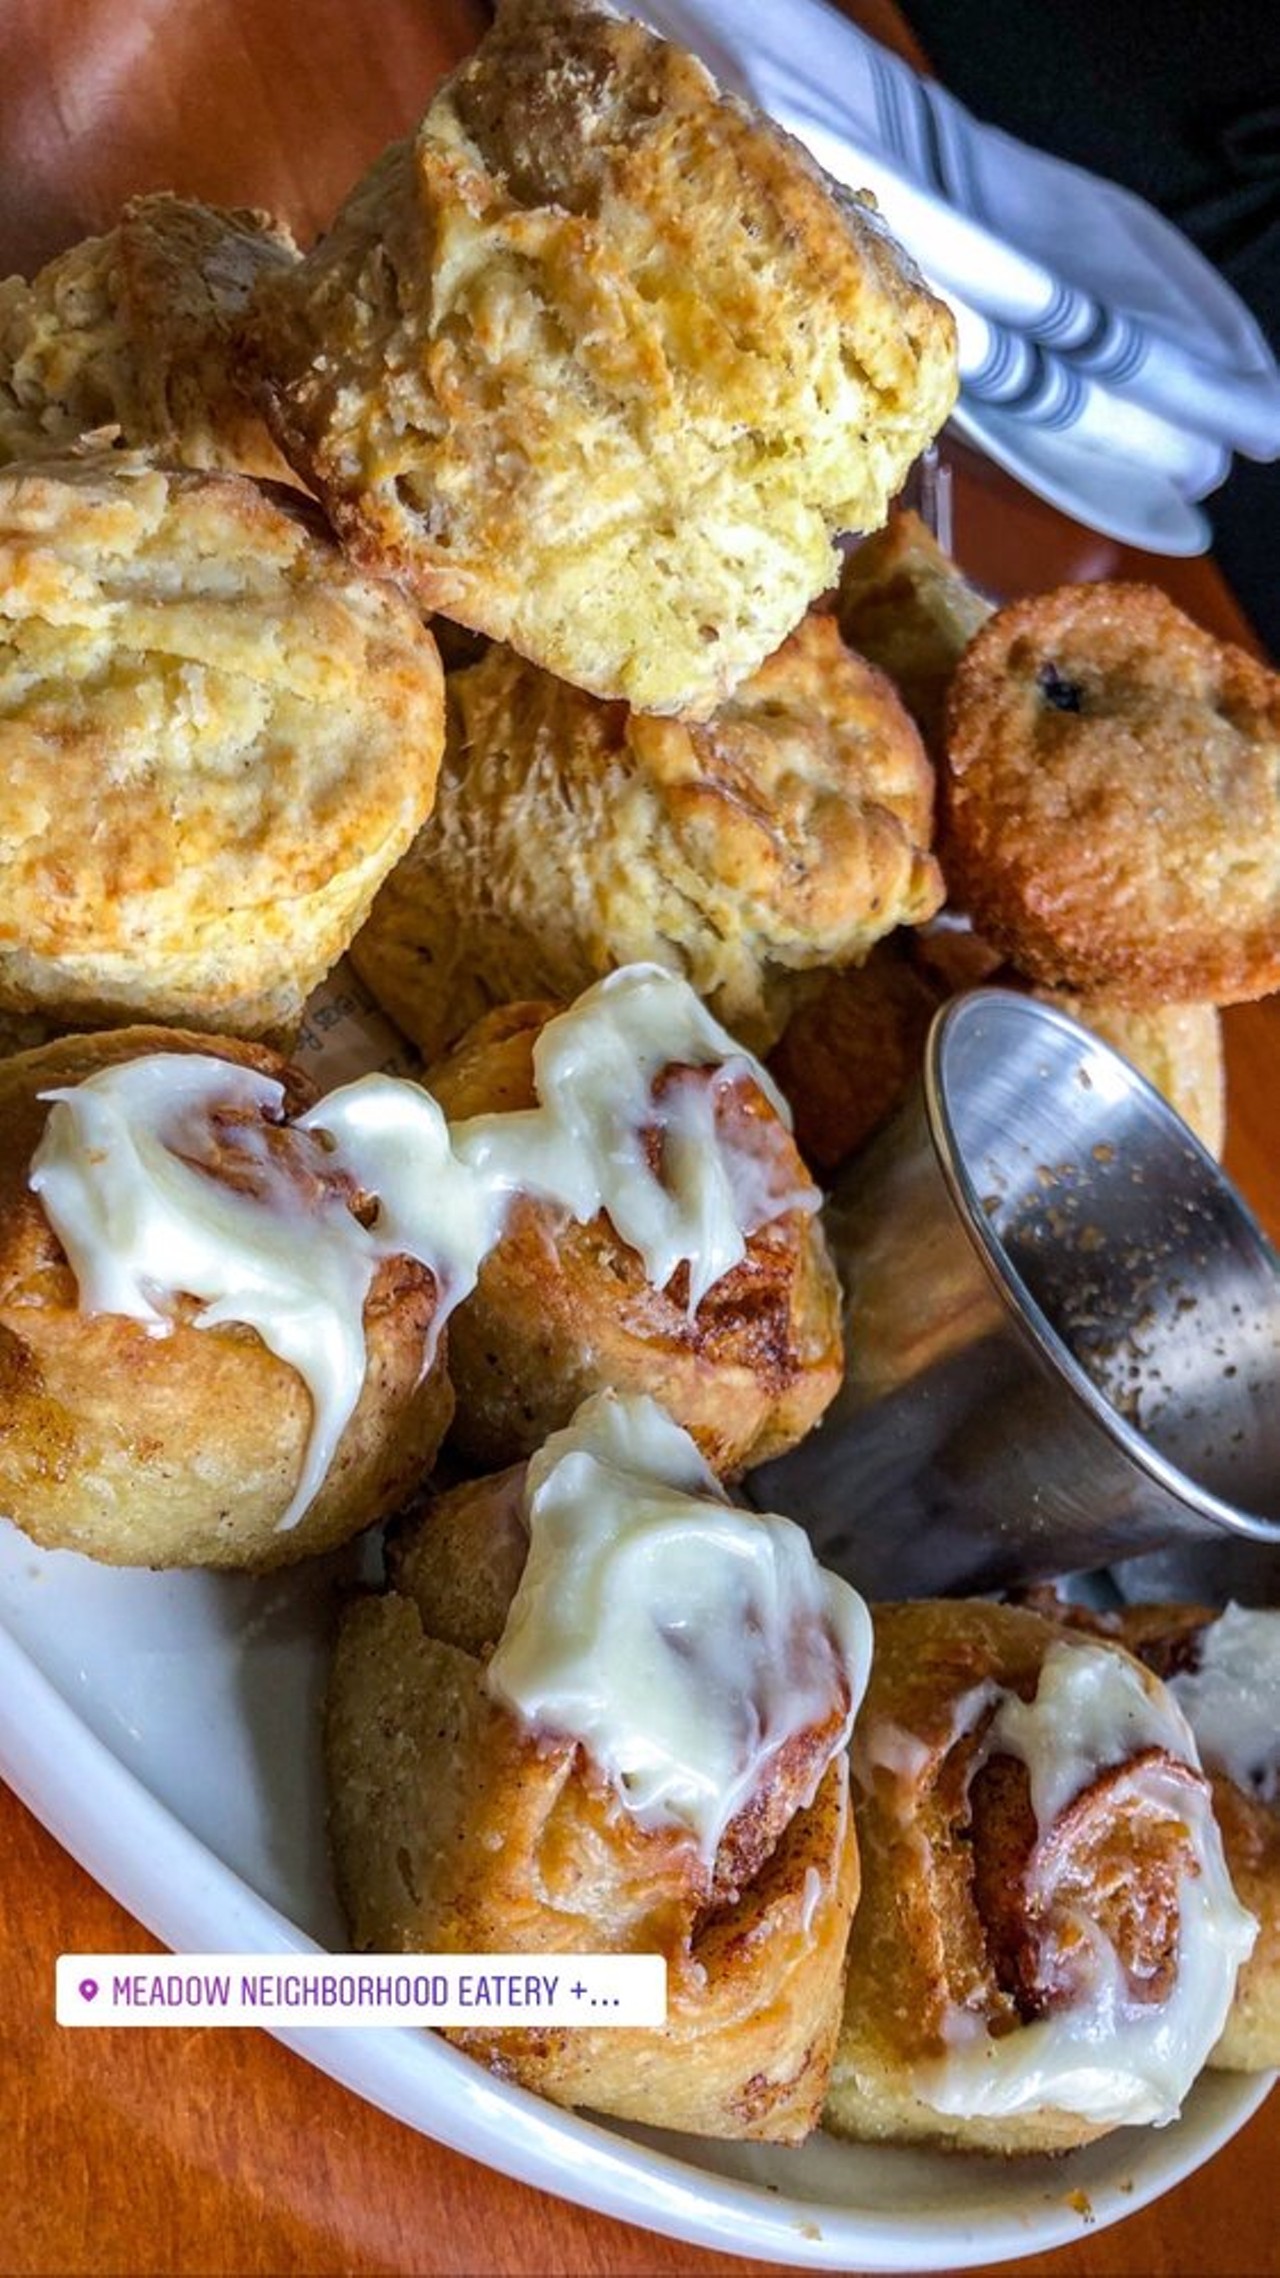 Meadow Neighborhood Eatery + Bar boasts homemade pastries like mini muffins, biscuits, and cinnamon rolls... Will these make an appearance at UWB?